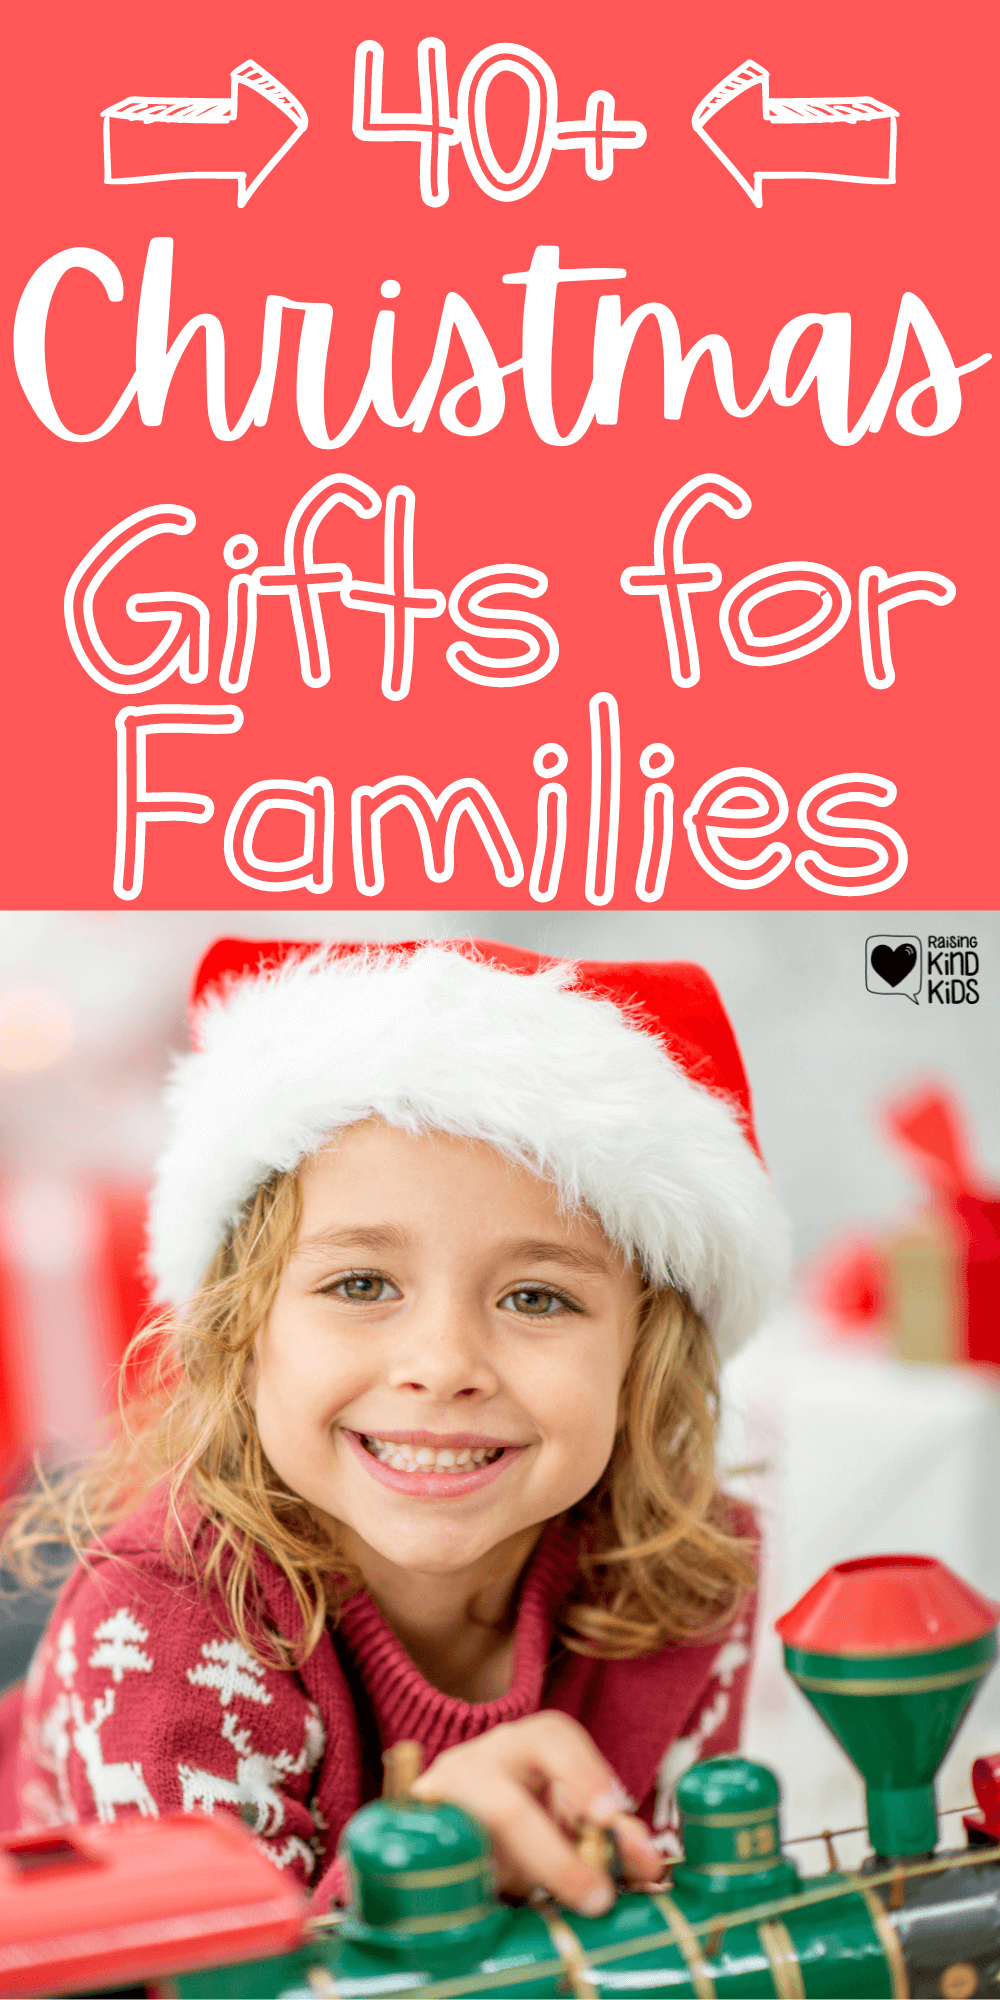 You'll love these Christmas themed gift ideas for kids and families to enjoy together that will make December even more spirited. 